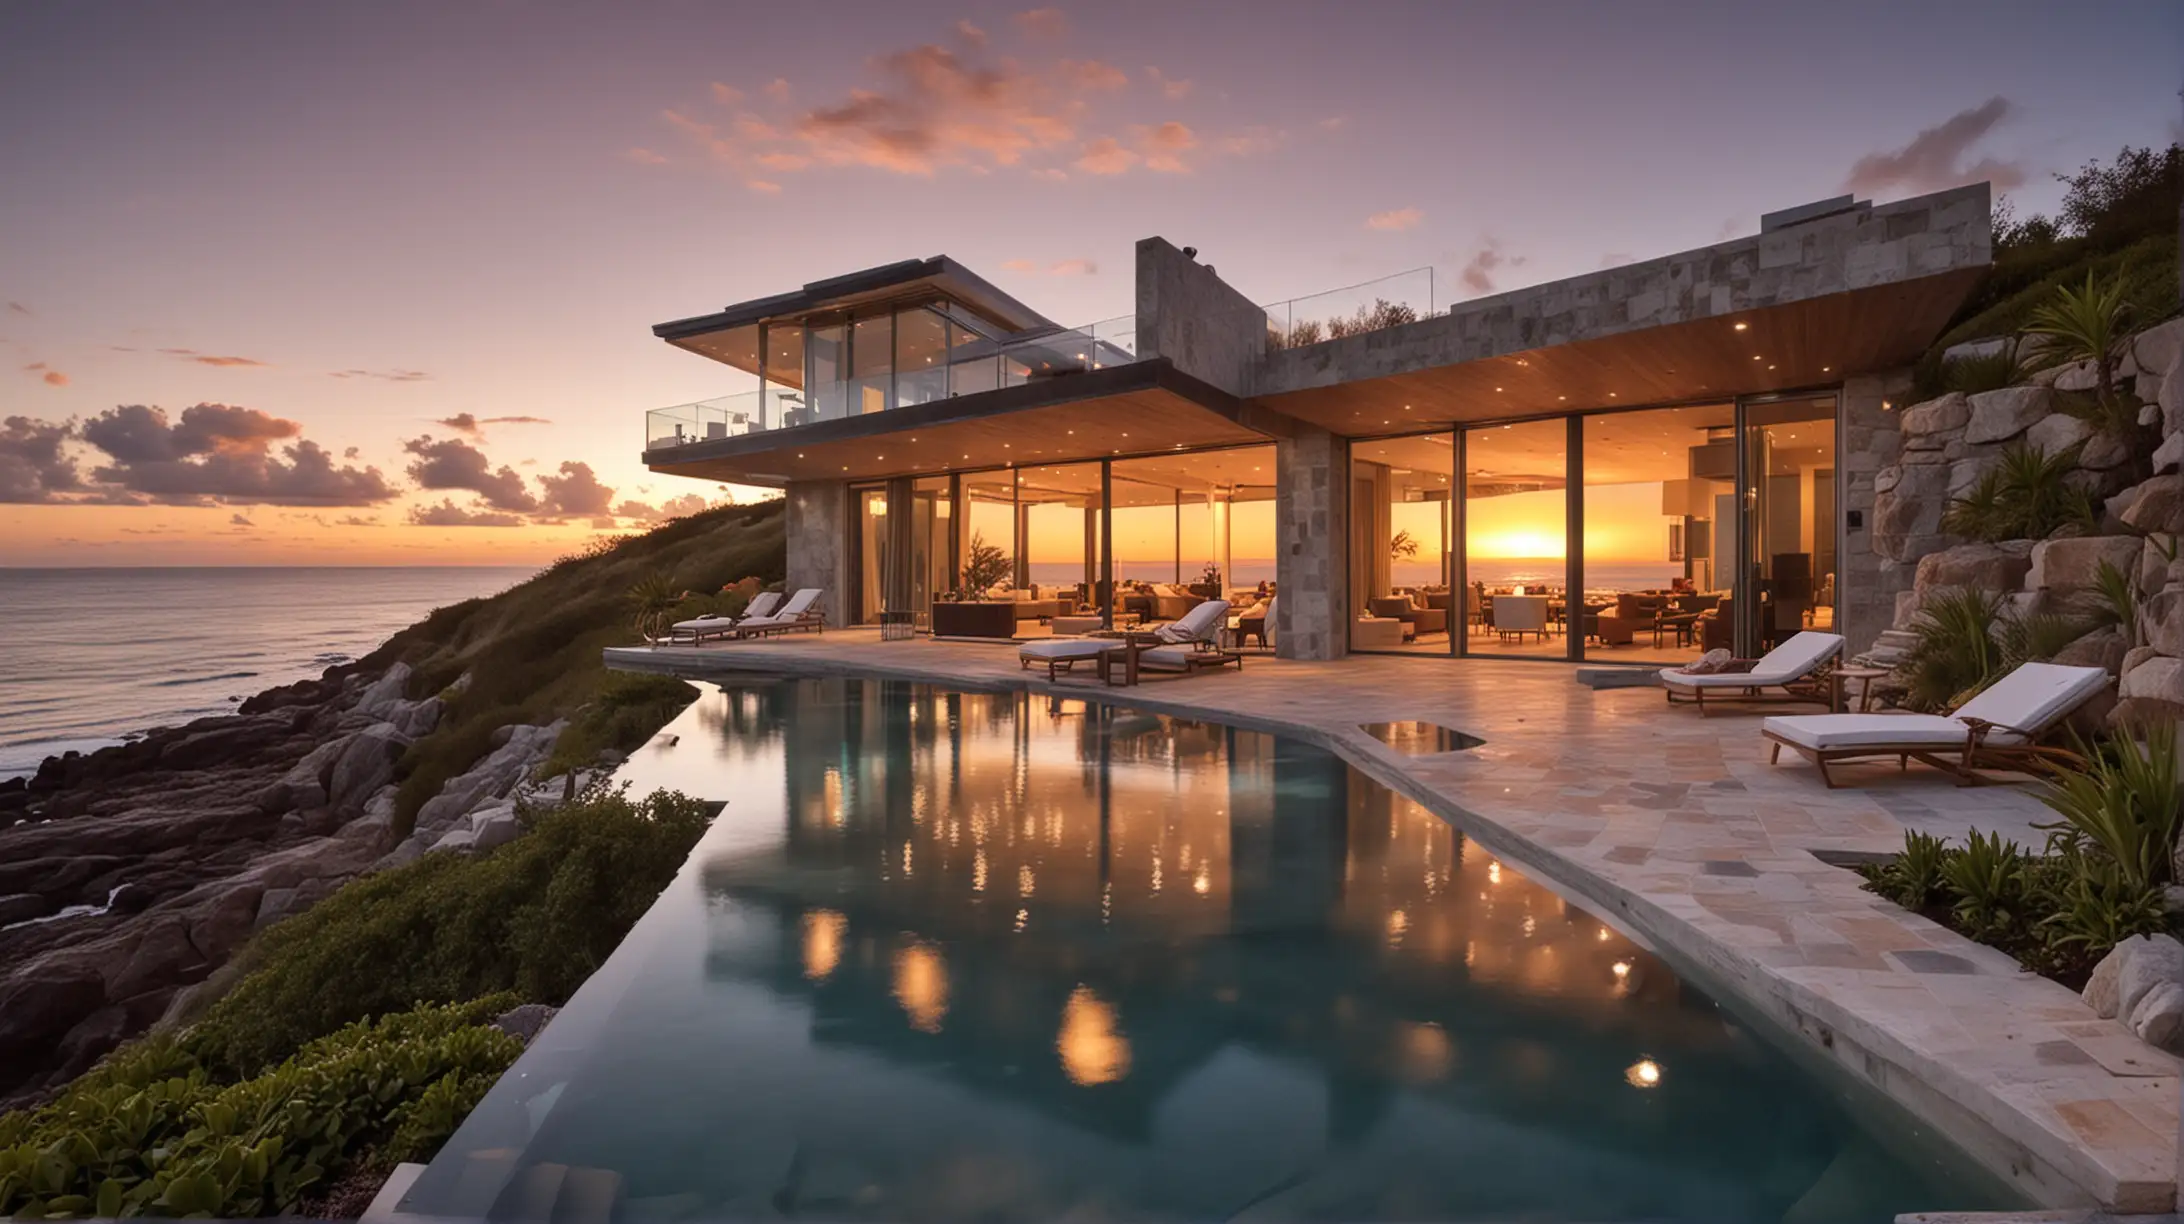 I would like to get a picture of an ocean front contemporary vacation home with an infinity pool and stunning outside living area at sunset. 
